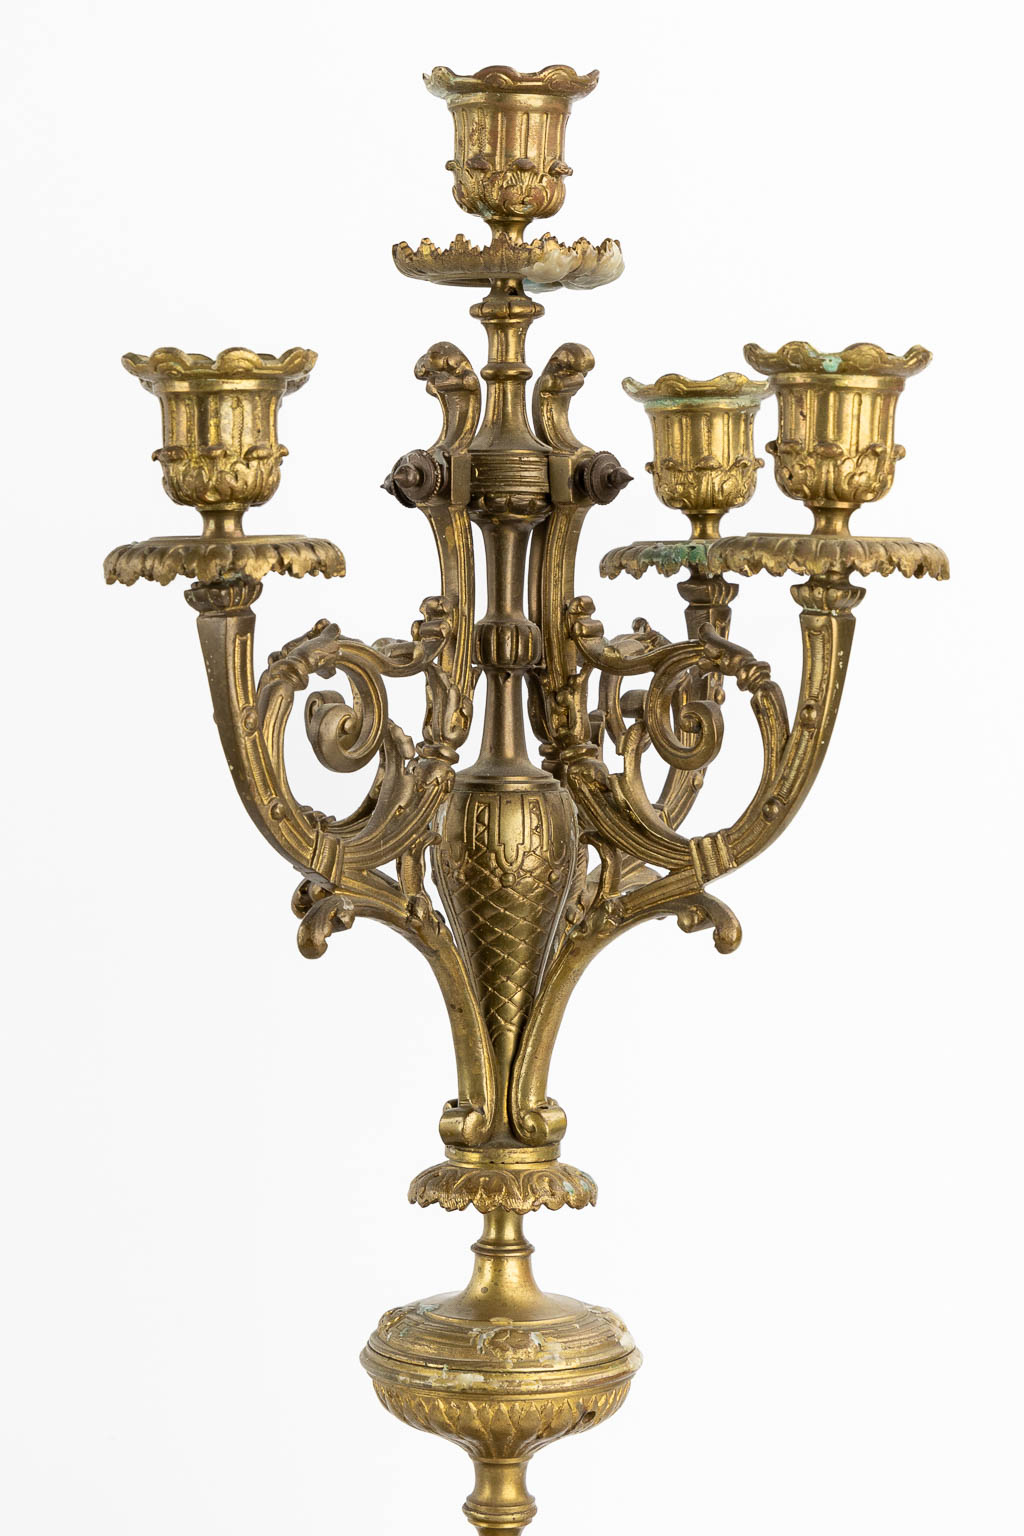 A three-piece mantle garniture clock and candelabra, patinated bronze. (L:16 x W:33 x H:50 cm) - Image 9 of 13